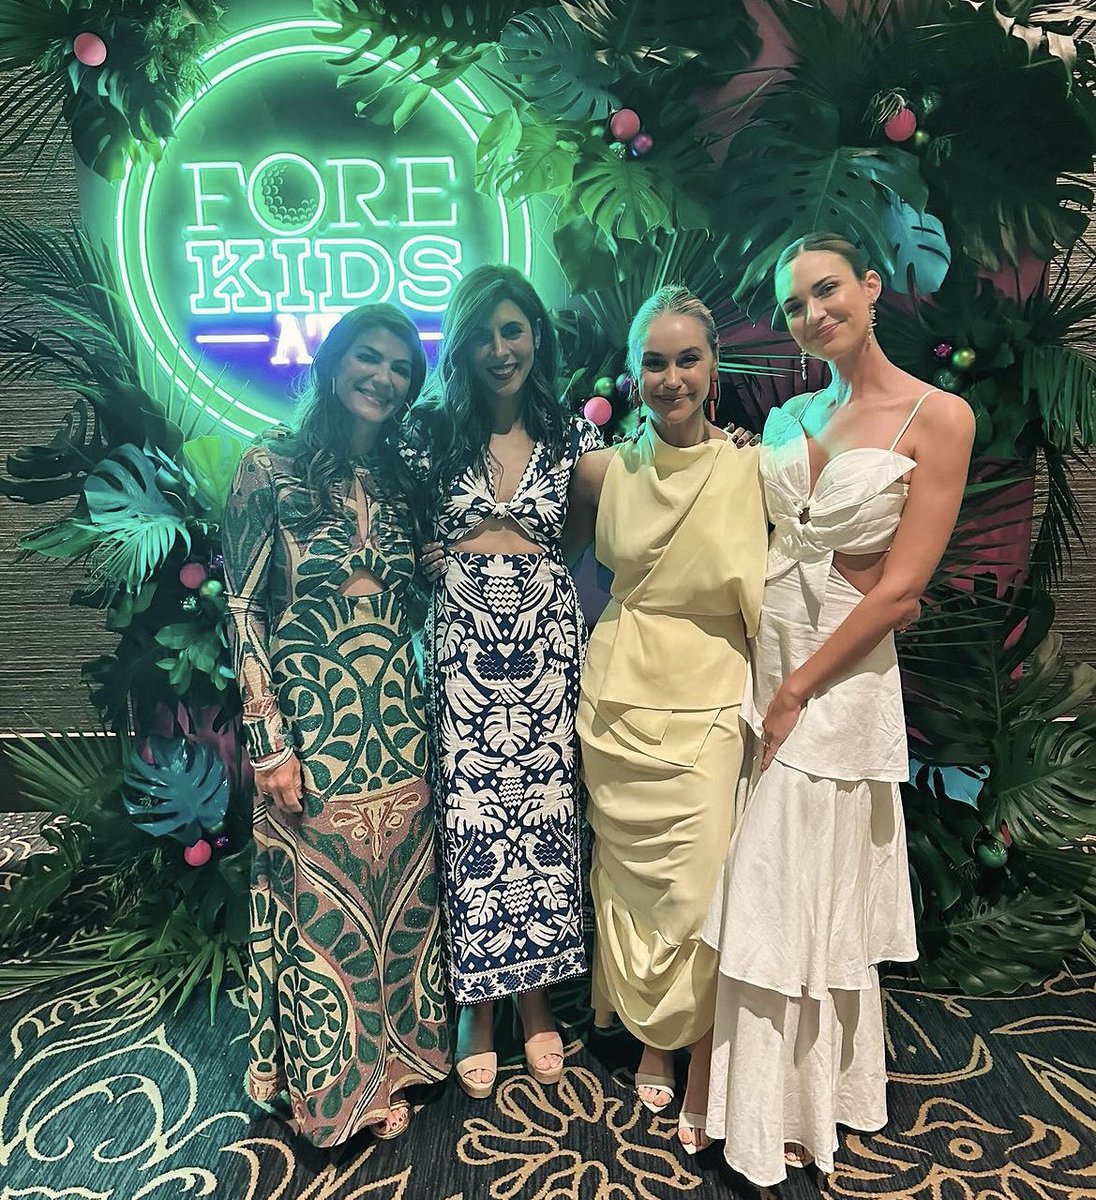 Gen and Jared with Odette Annable and others at the Fore Kids event in Austin, TX ❤️

Via Gen and Odette on IG

#genpadalecki #jaredpadalecki #genevievepadalecki #odetteannable